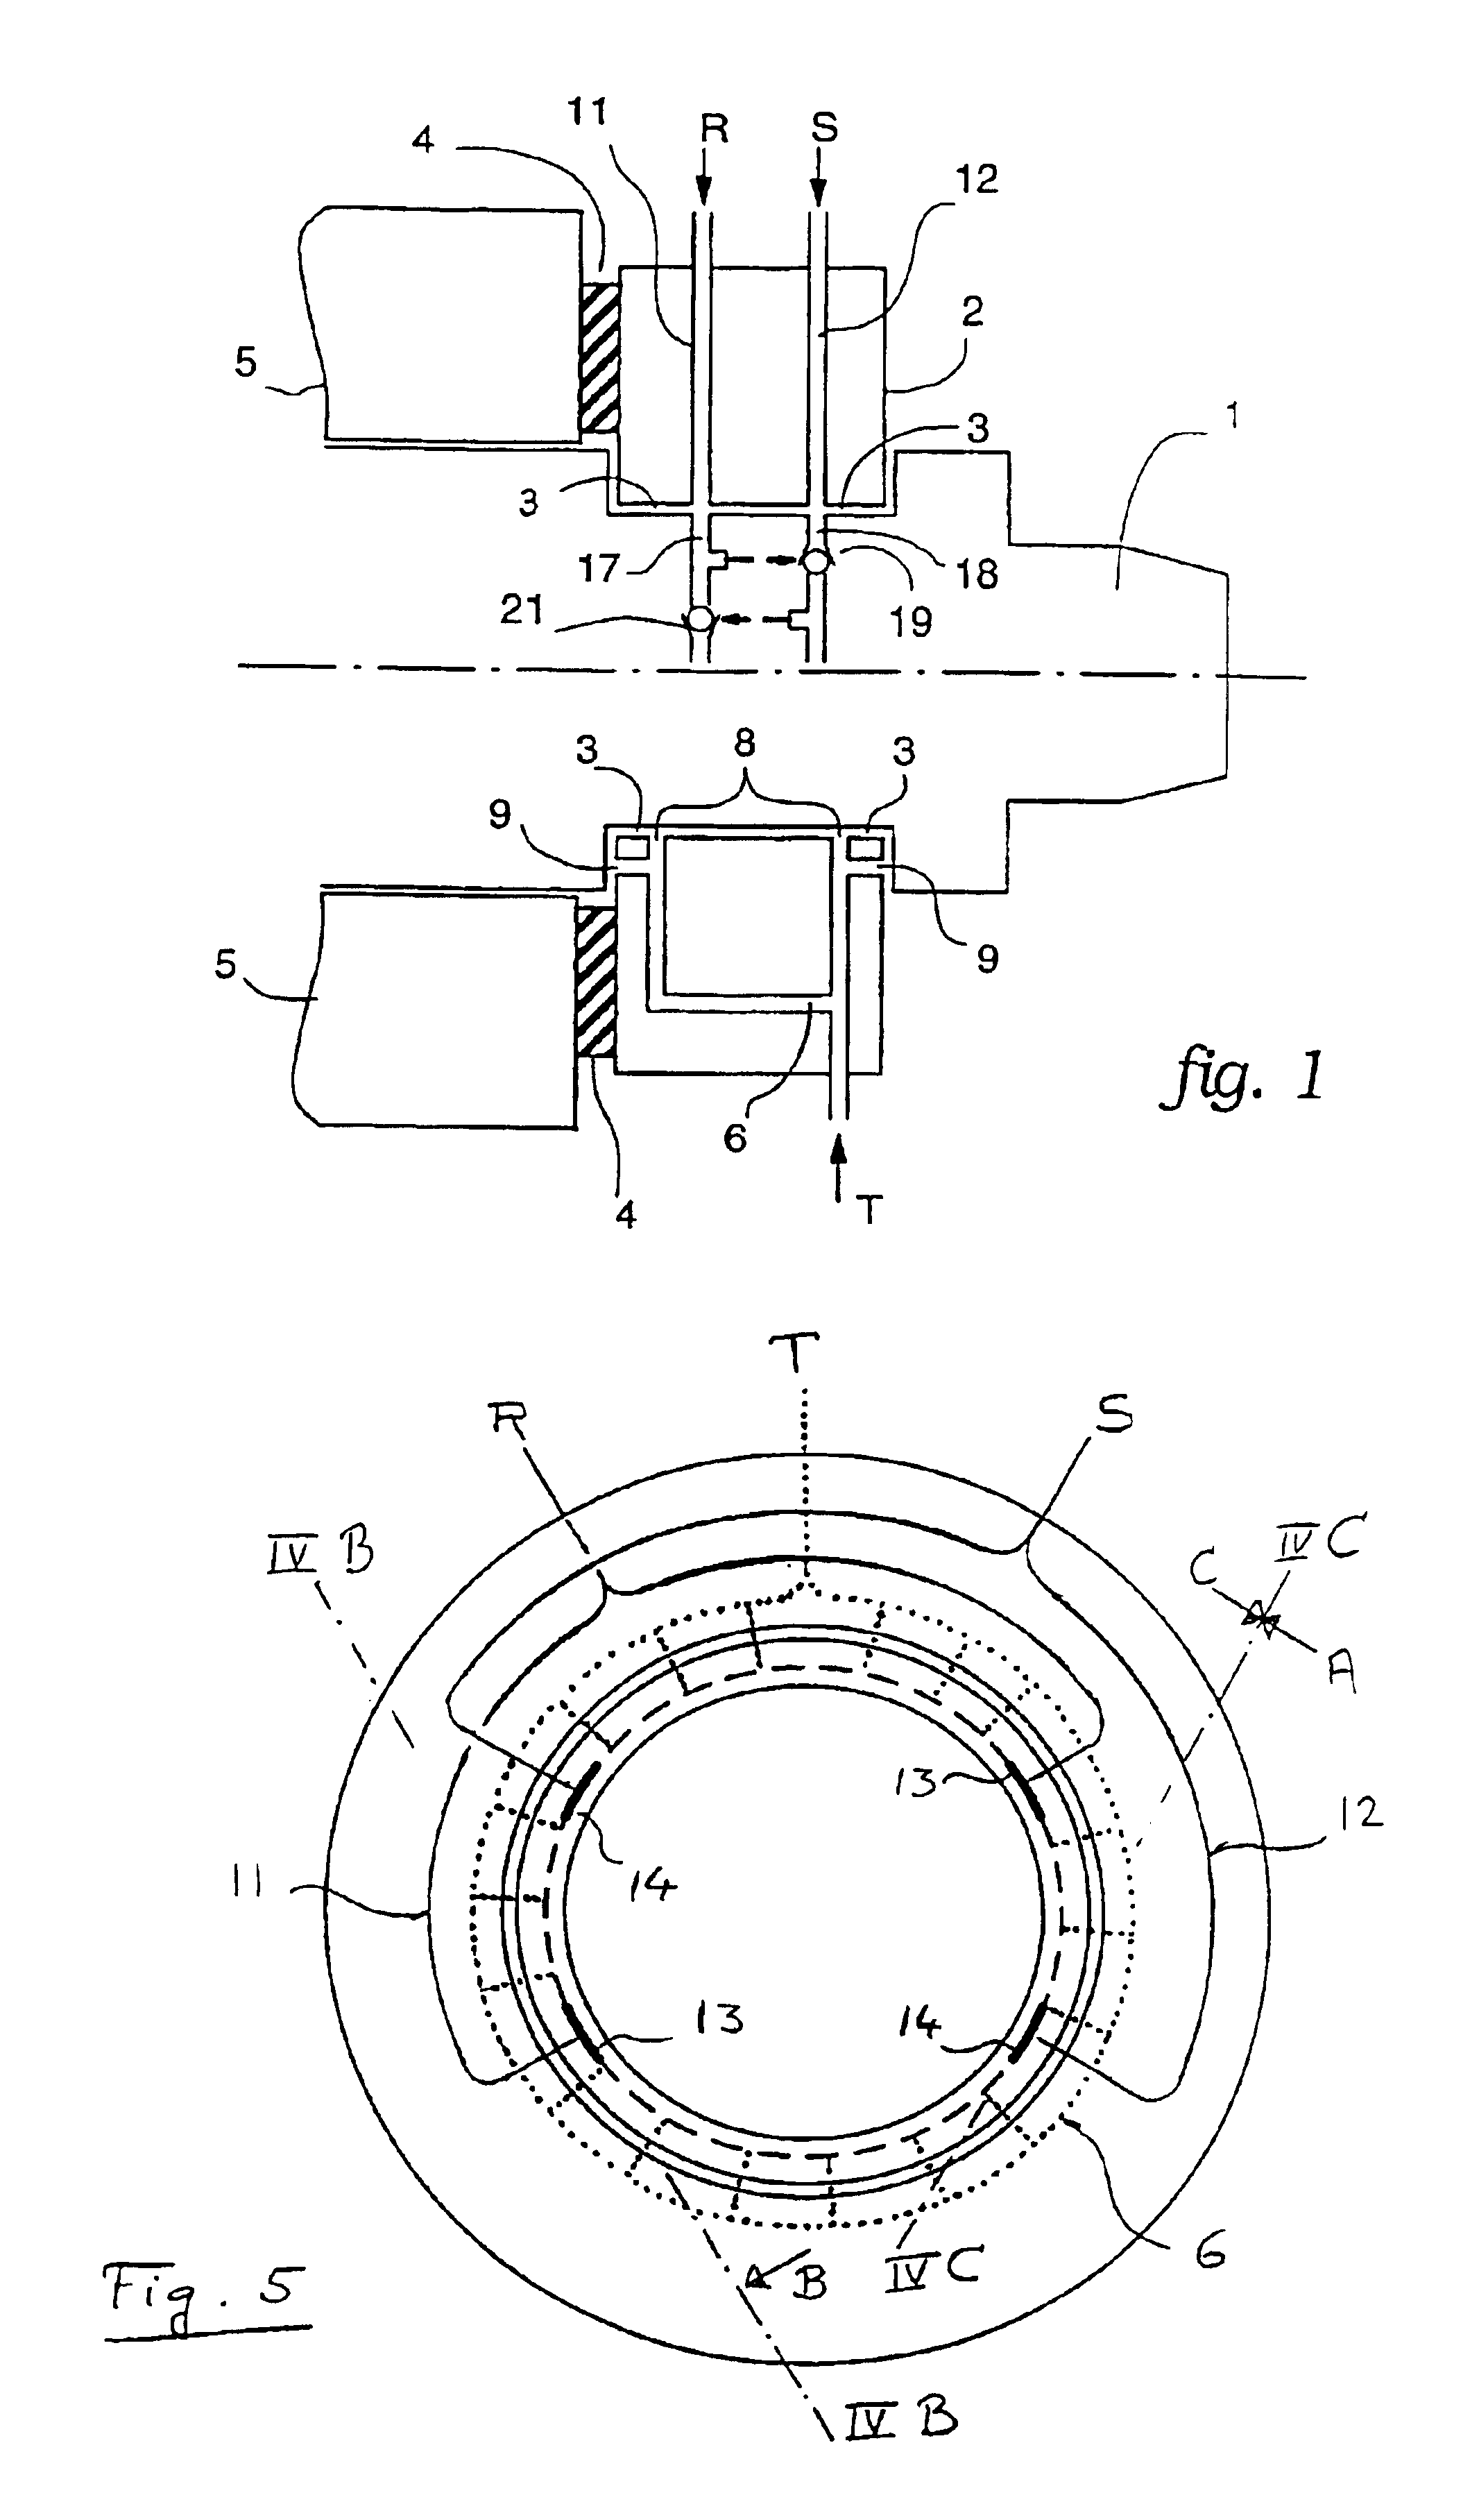 Rotation-independent actuation of a machine element